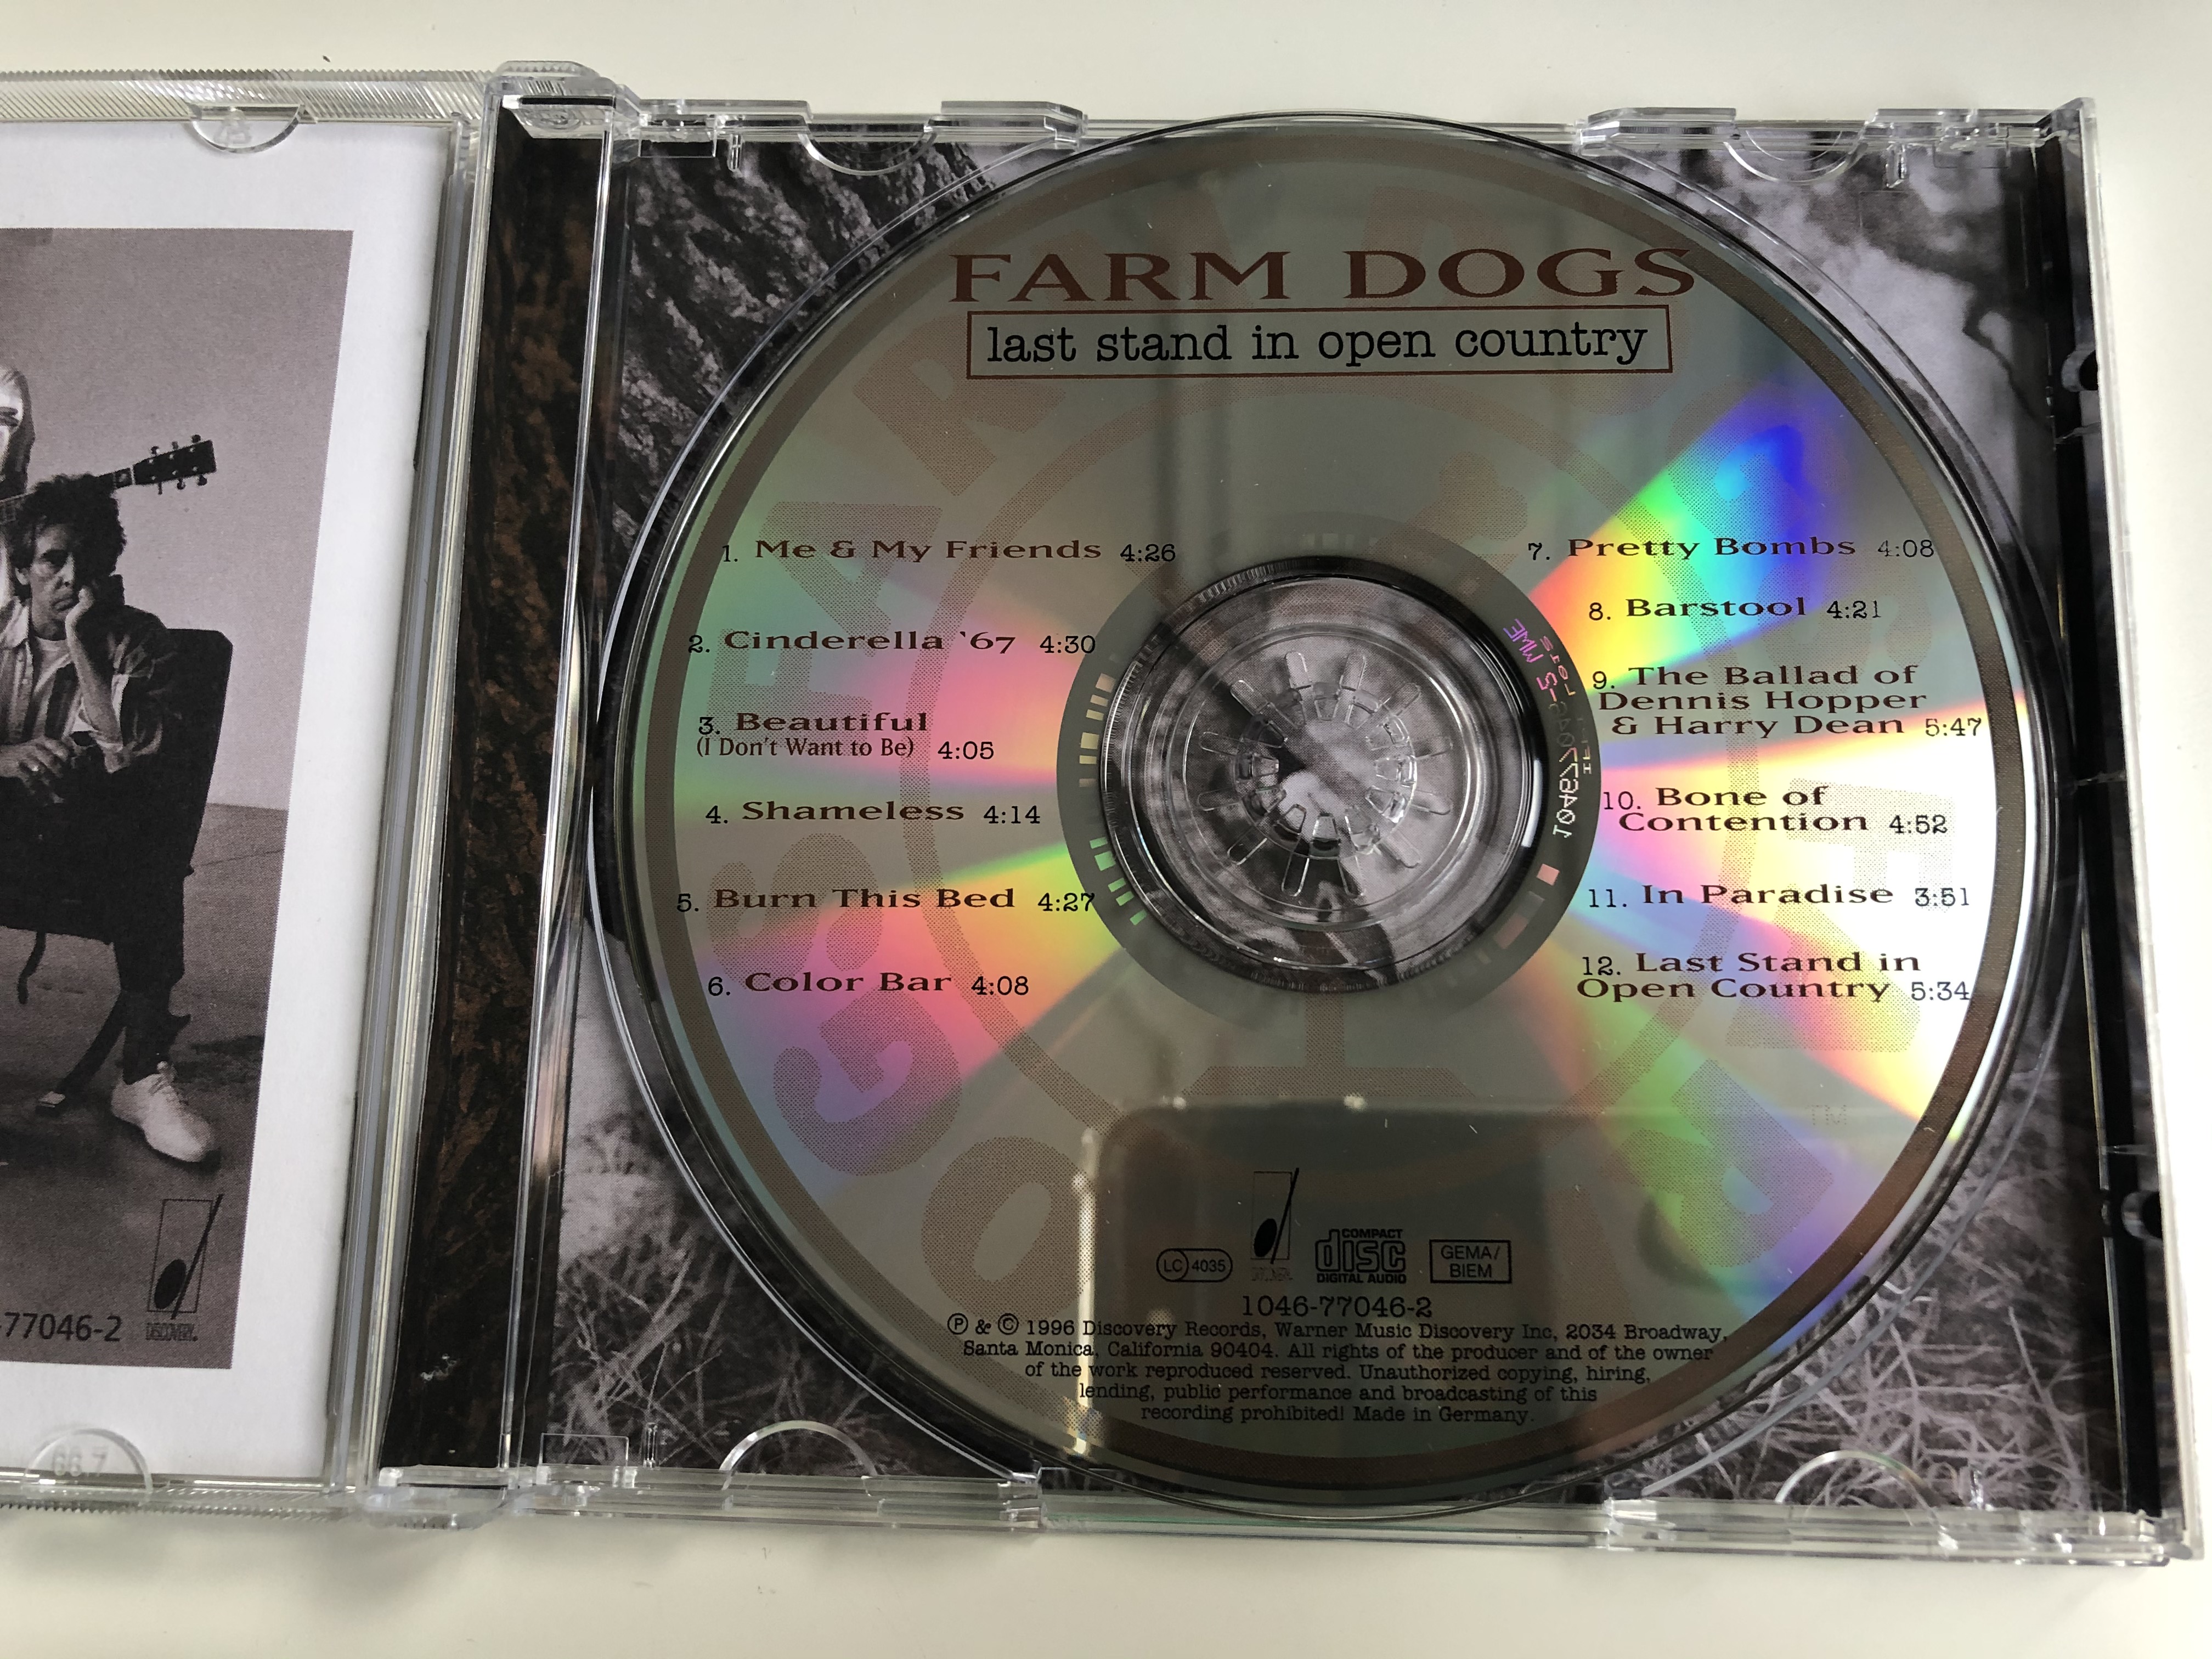 farm-dogs-last-stand-in-open-country-discovery-records-audio-cd-1996-1046-77046-2-8-.jpg